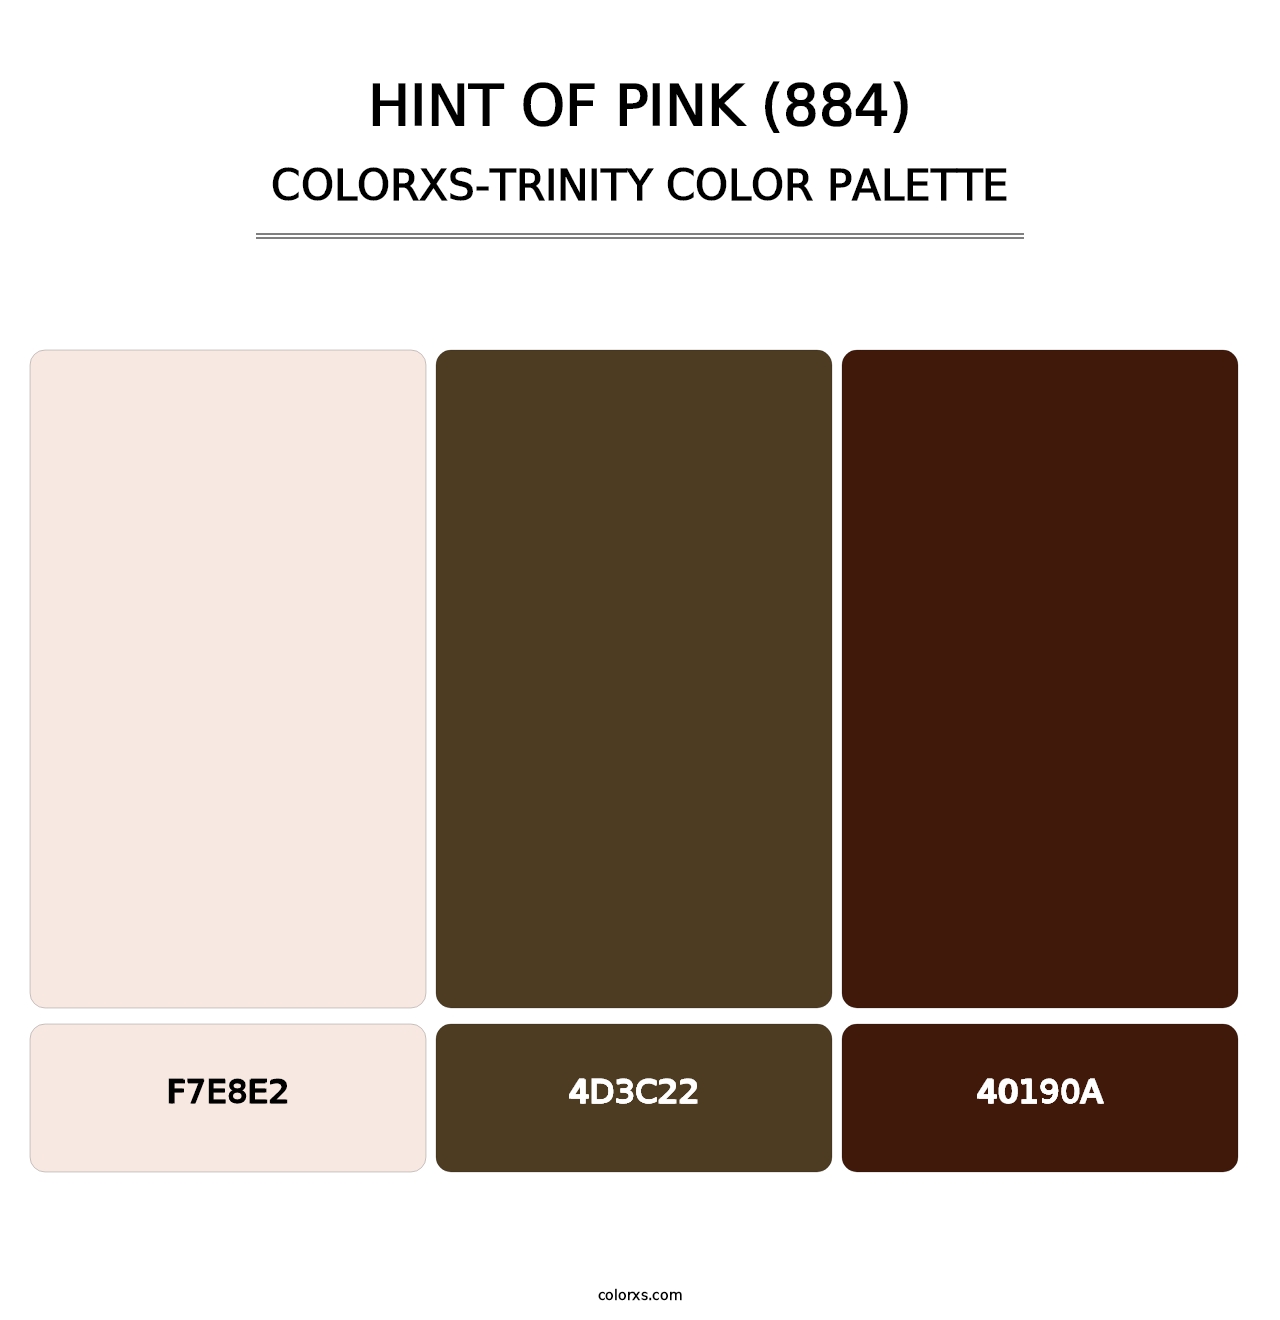 Hint of Pink (884) - Colorxs Trinity Palette